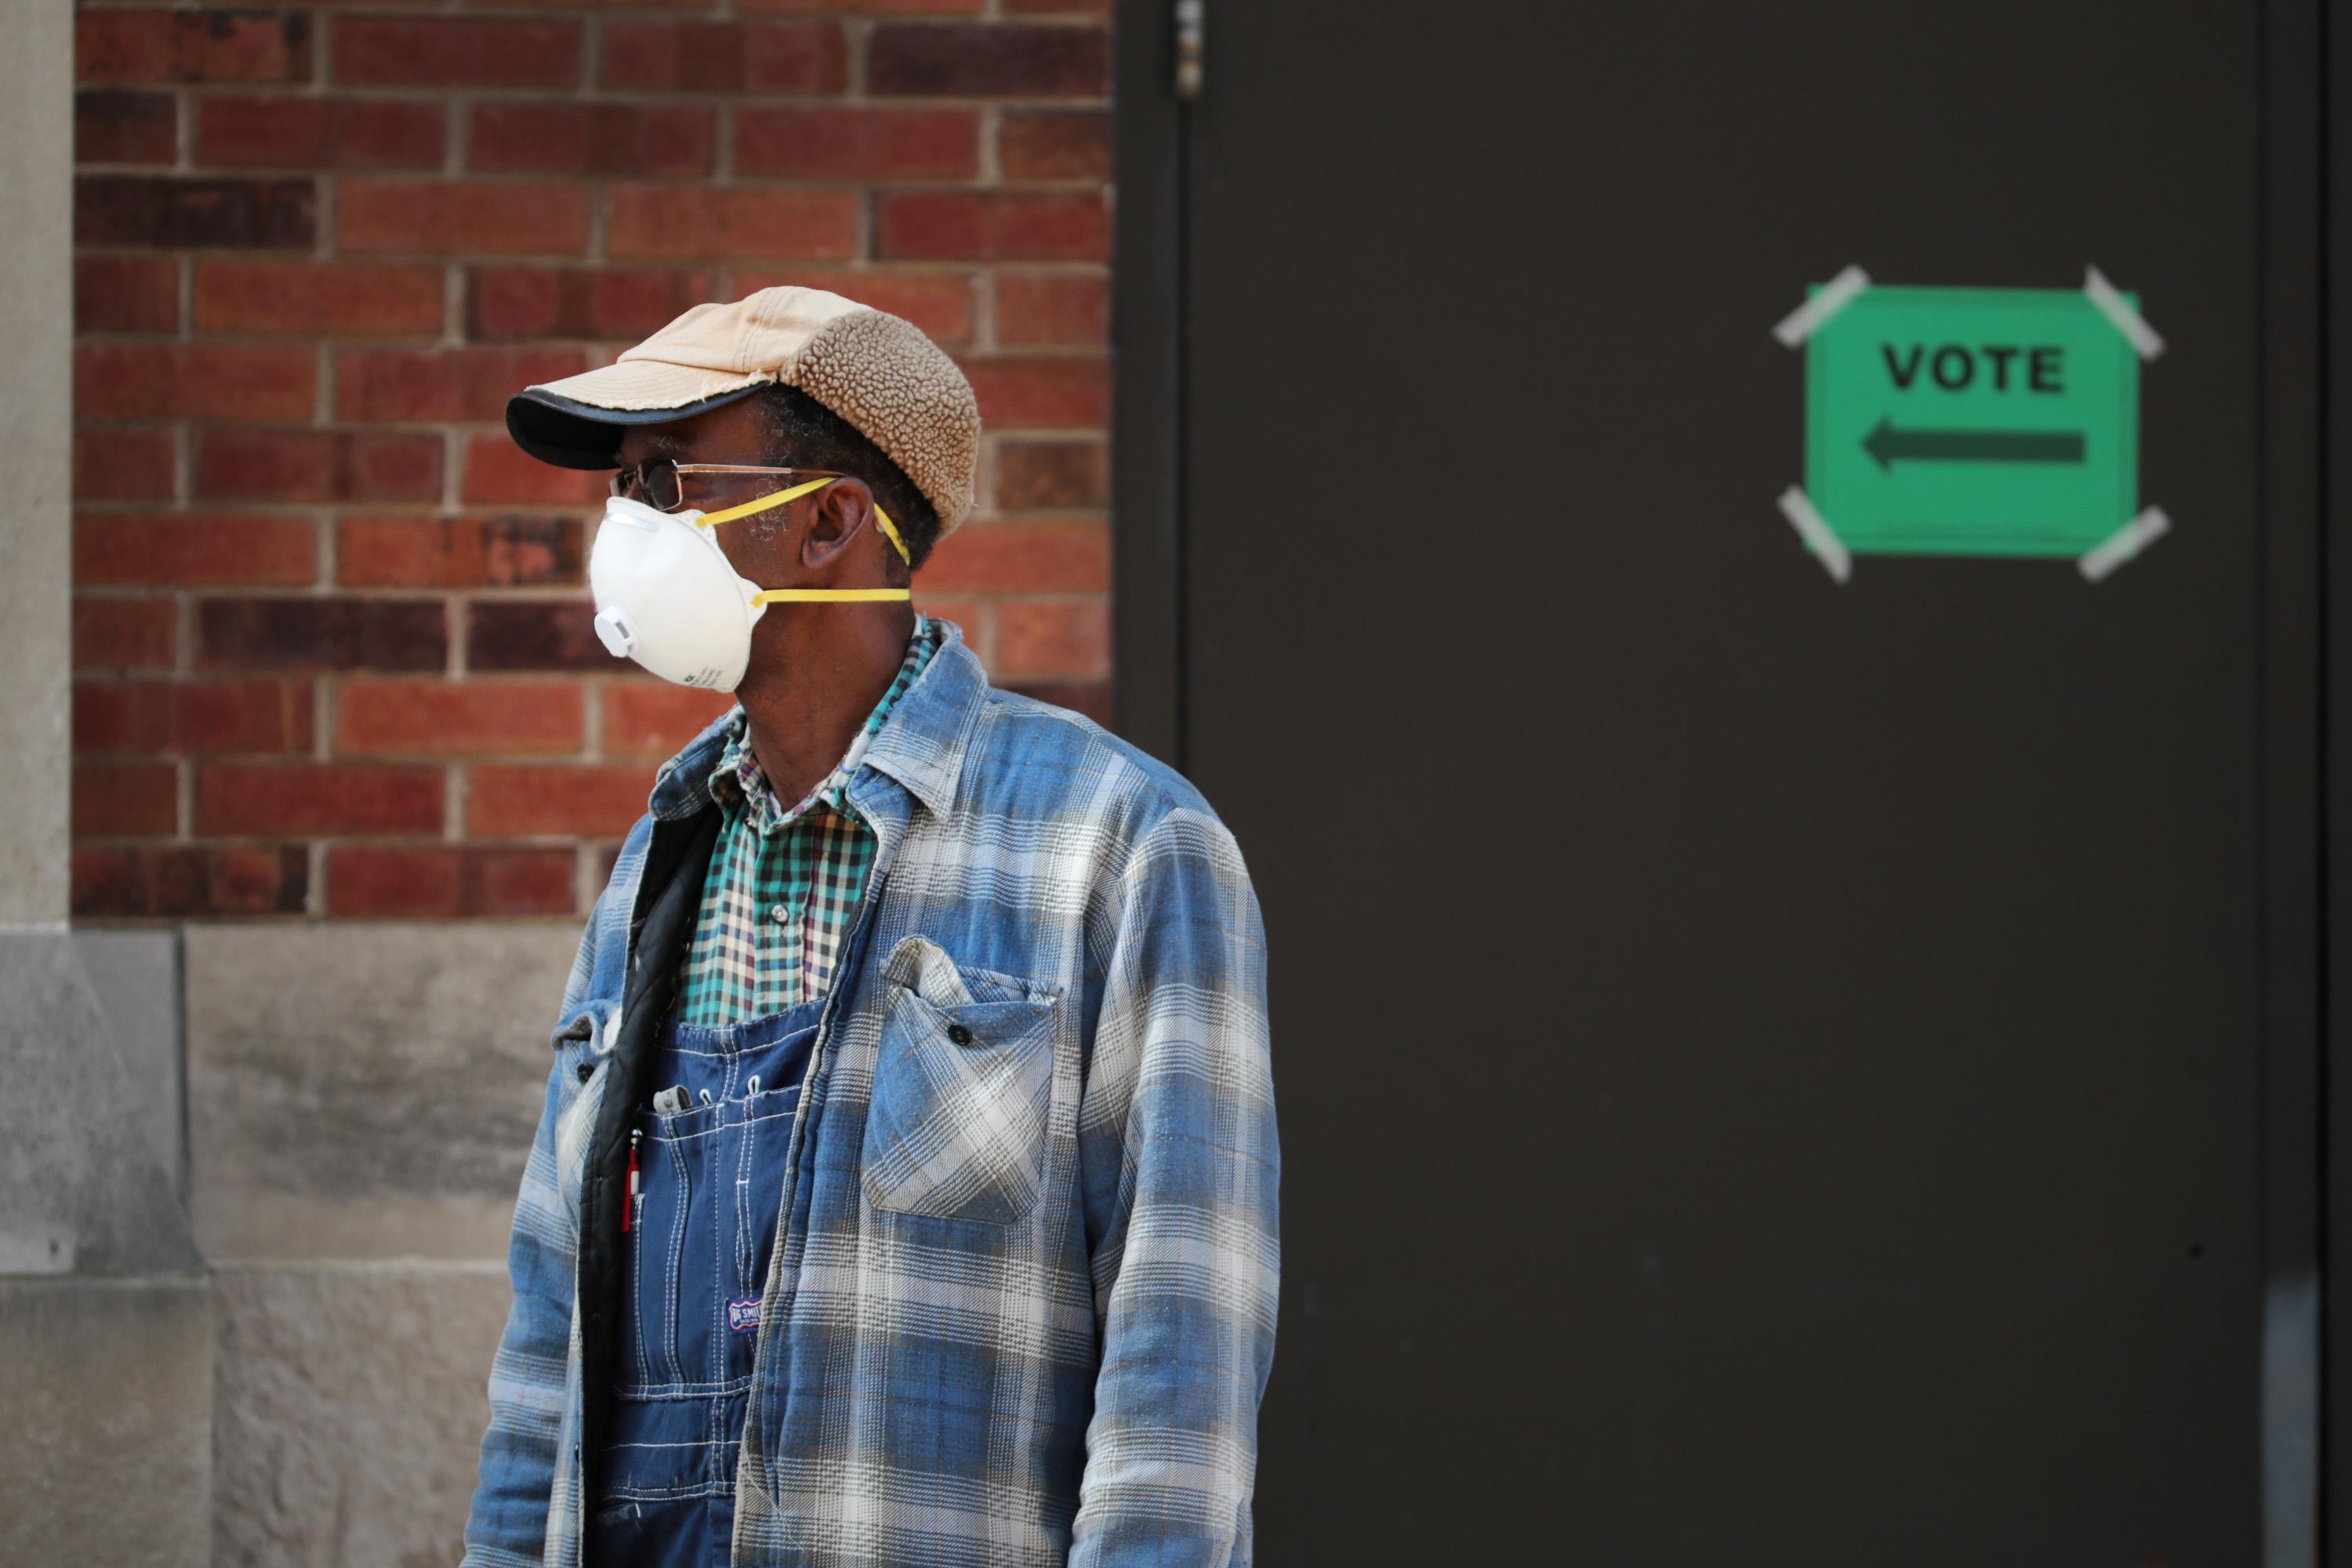 A person wears a face mask and stands near a door with a sign that says "Vote" and points an arrow to the left.